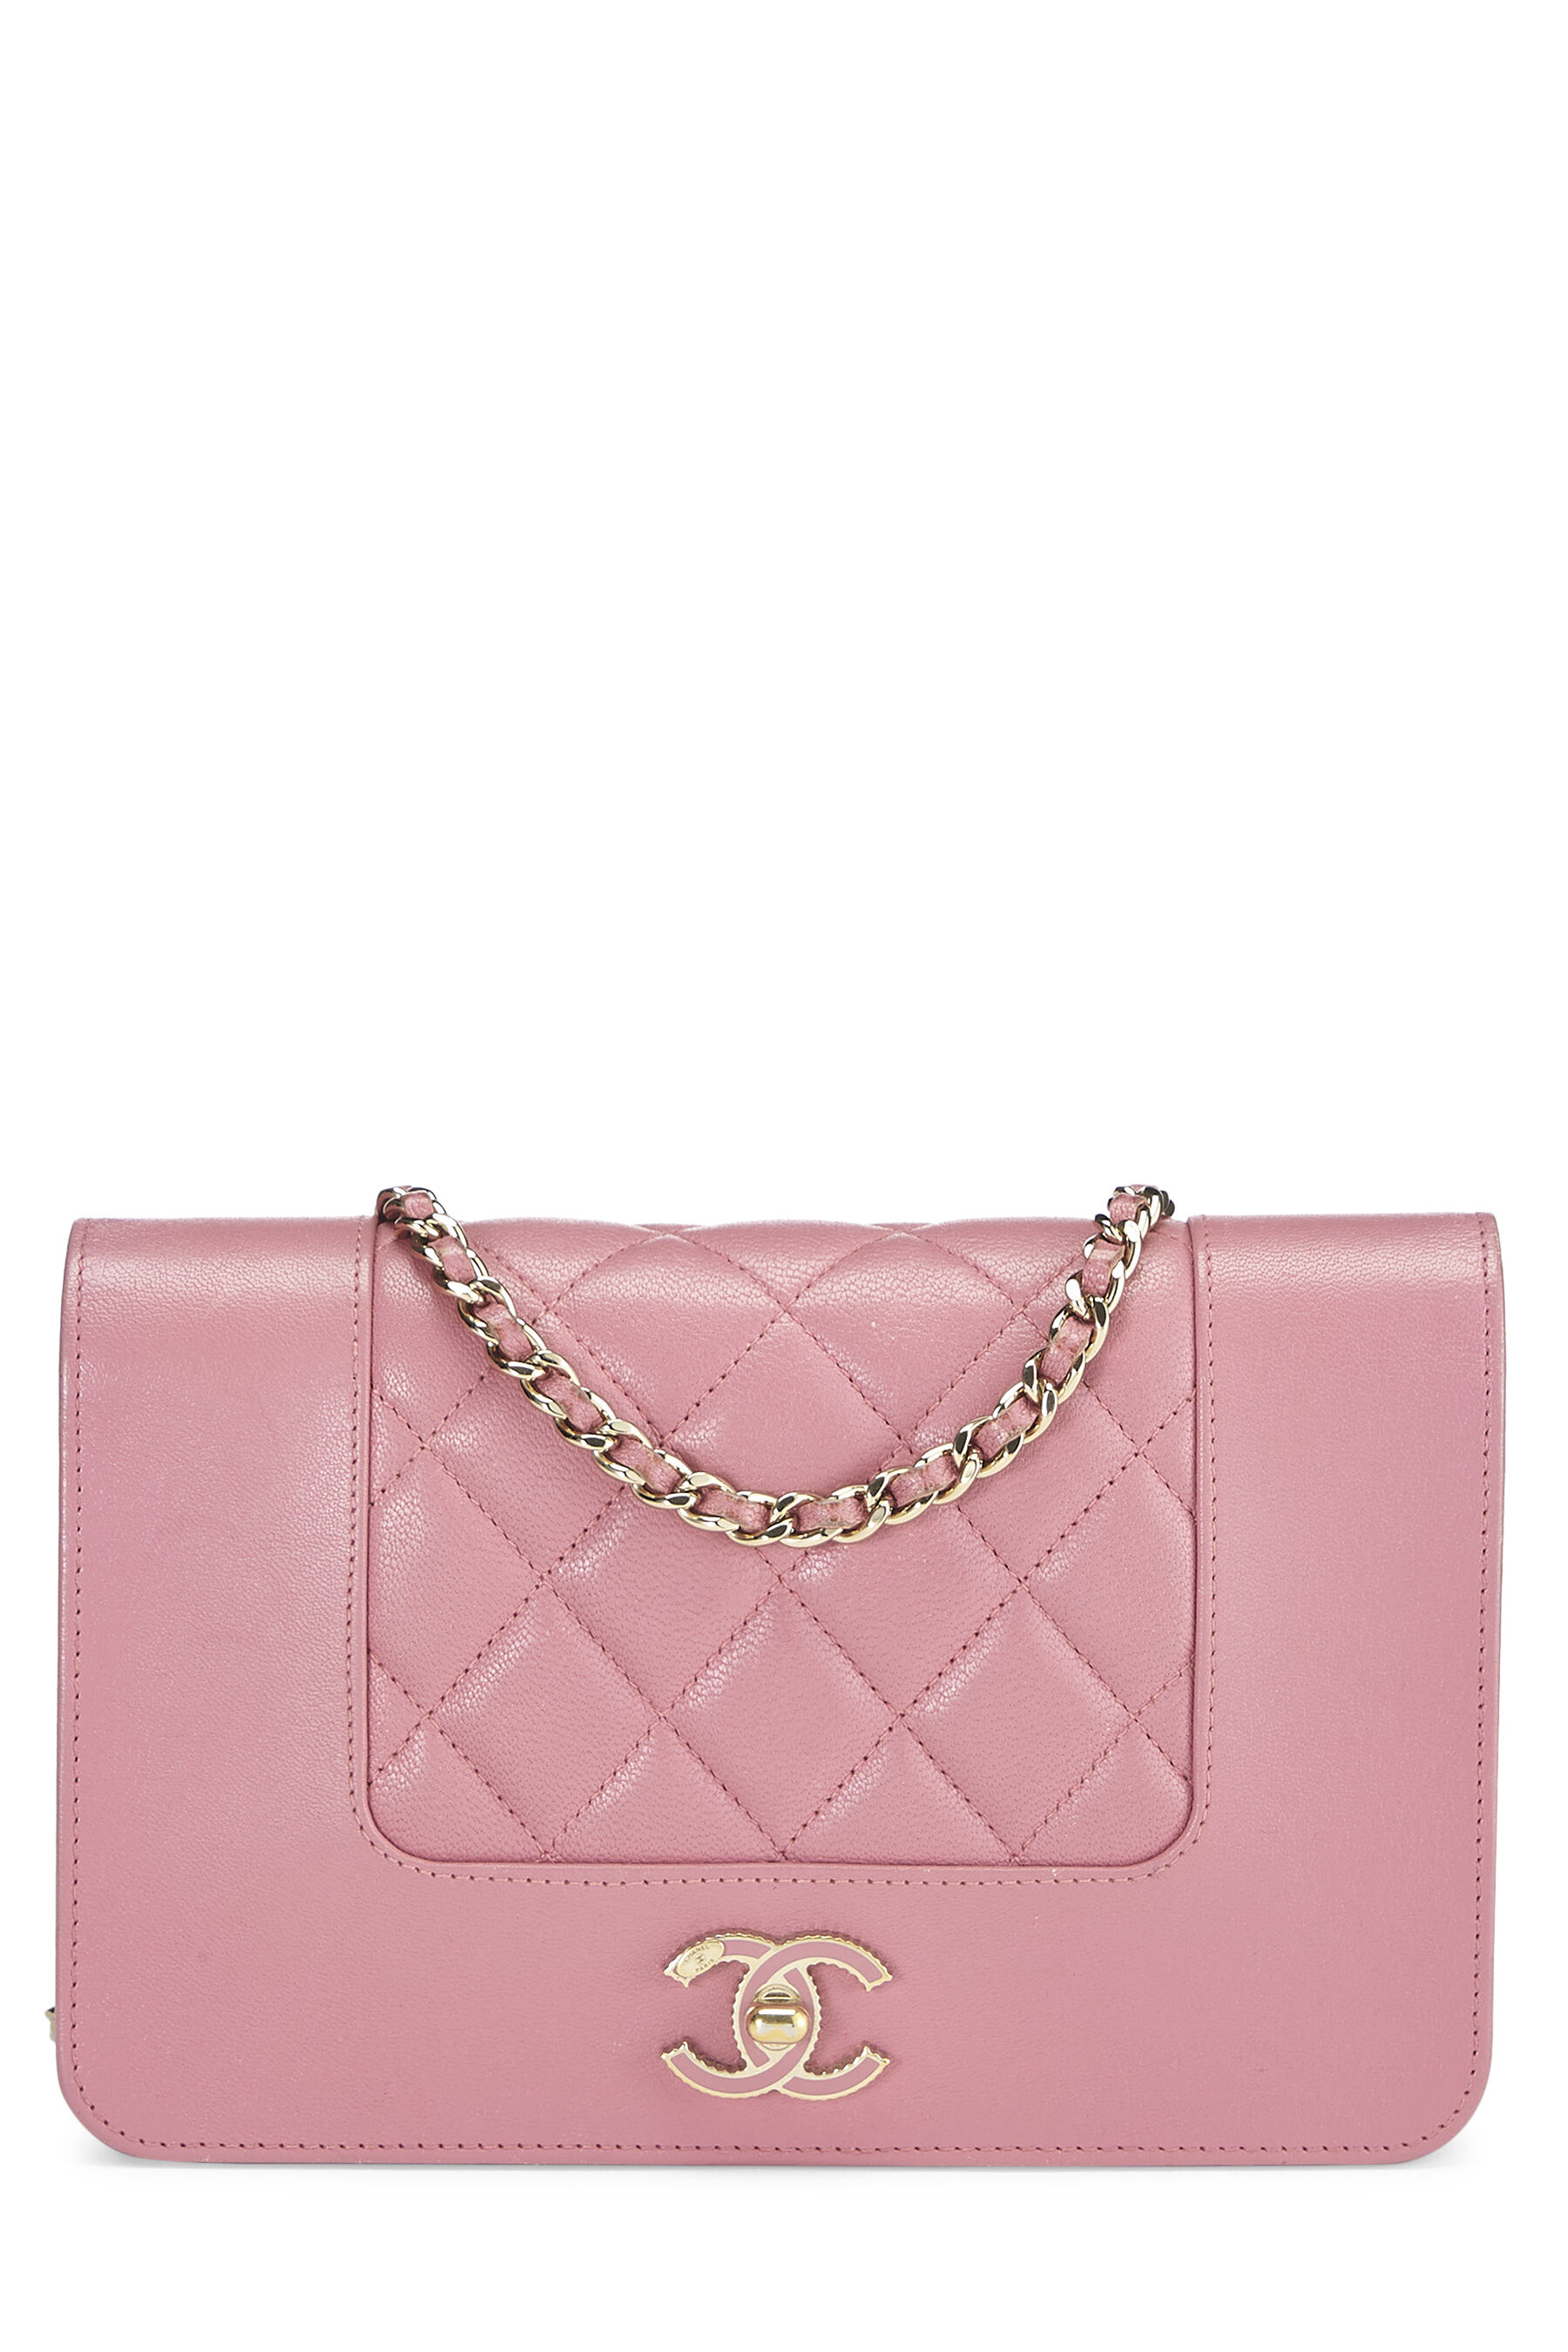 Chanel - Pink Quilted Calfskin Mademoiselle Wallet on Chain (WOC)